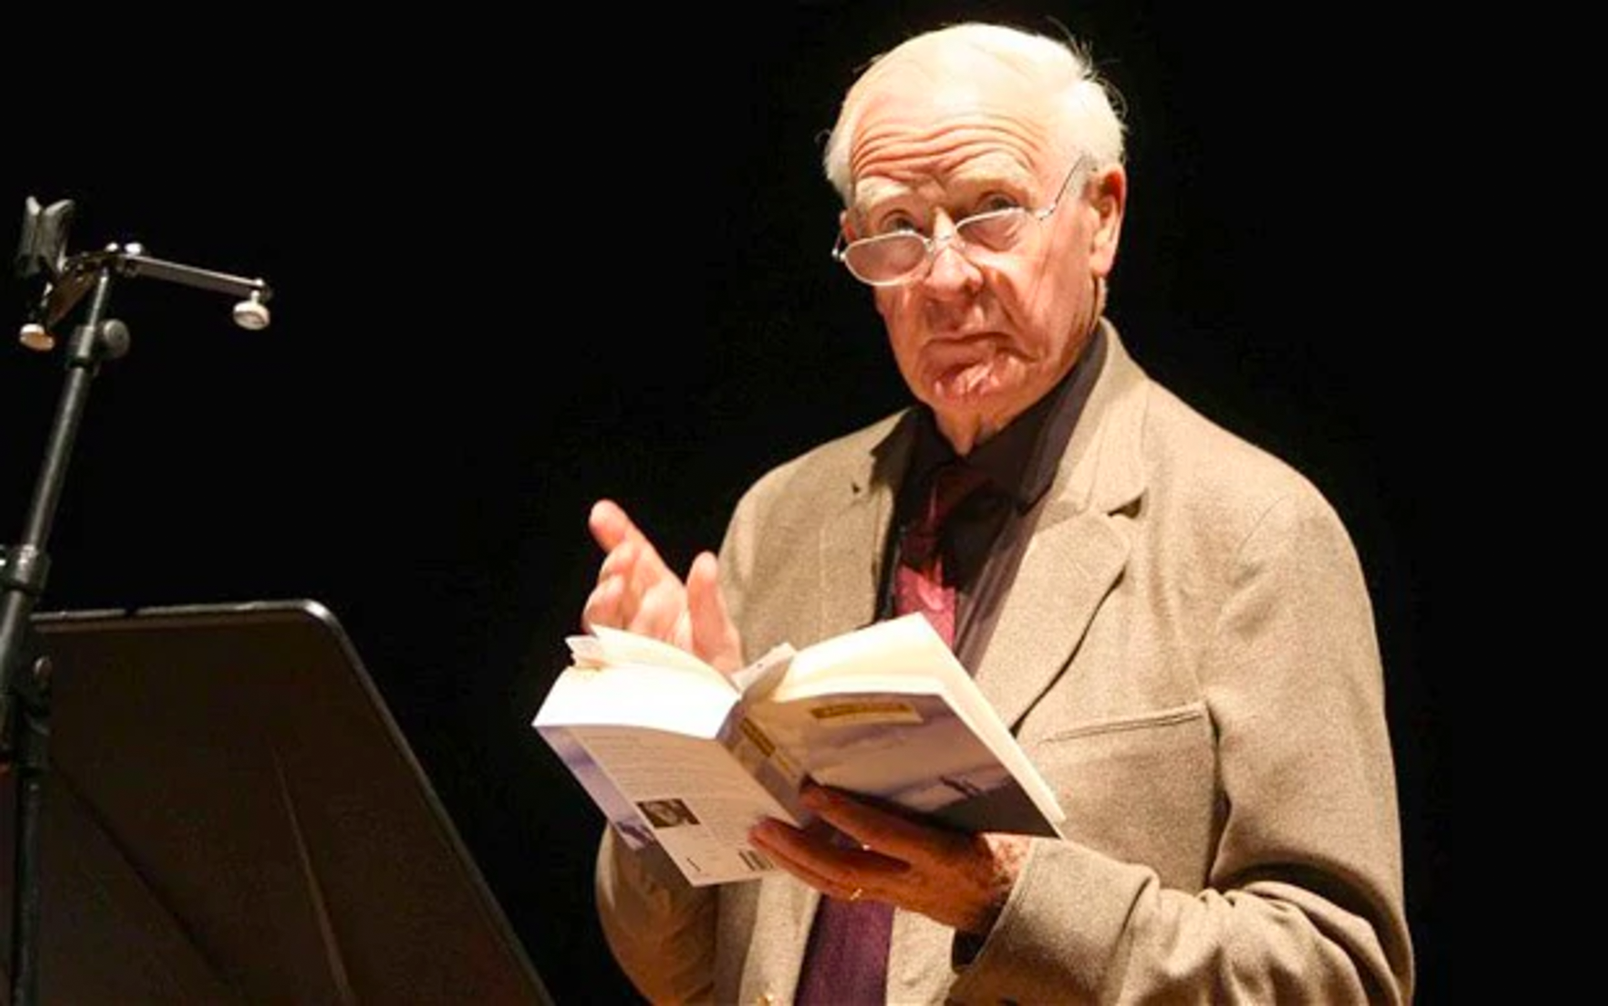 John Le Carré presents An Evening with George Smiley